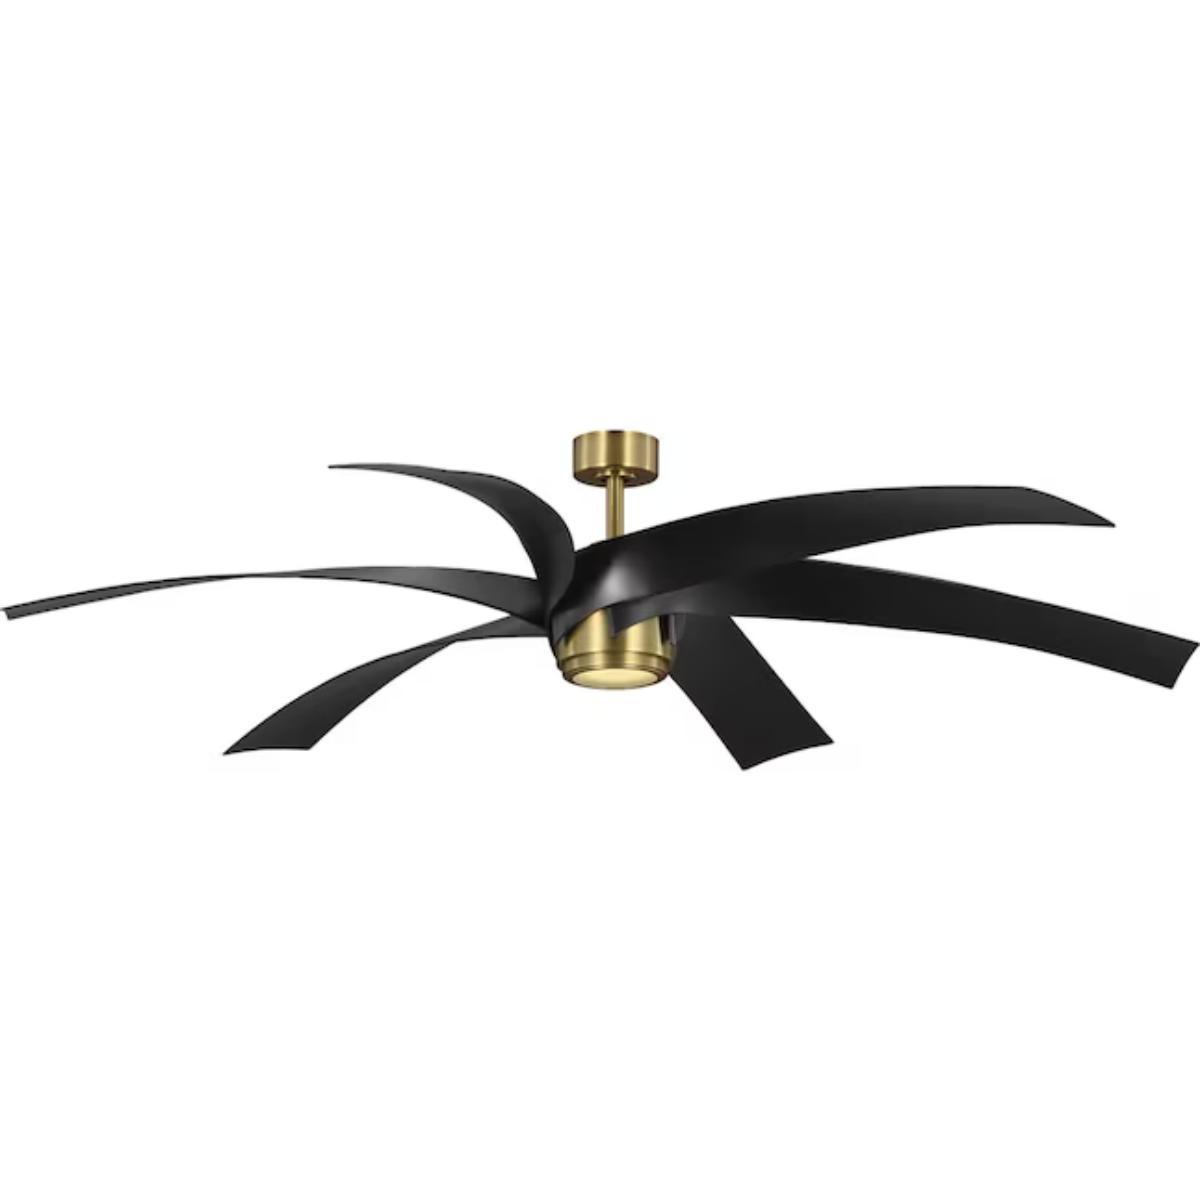 Insigna 72 Inch LED Ceiling Fan with Light Kit and Remote, Vintage Brass with Matte Black Blades - Bees Lighting